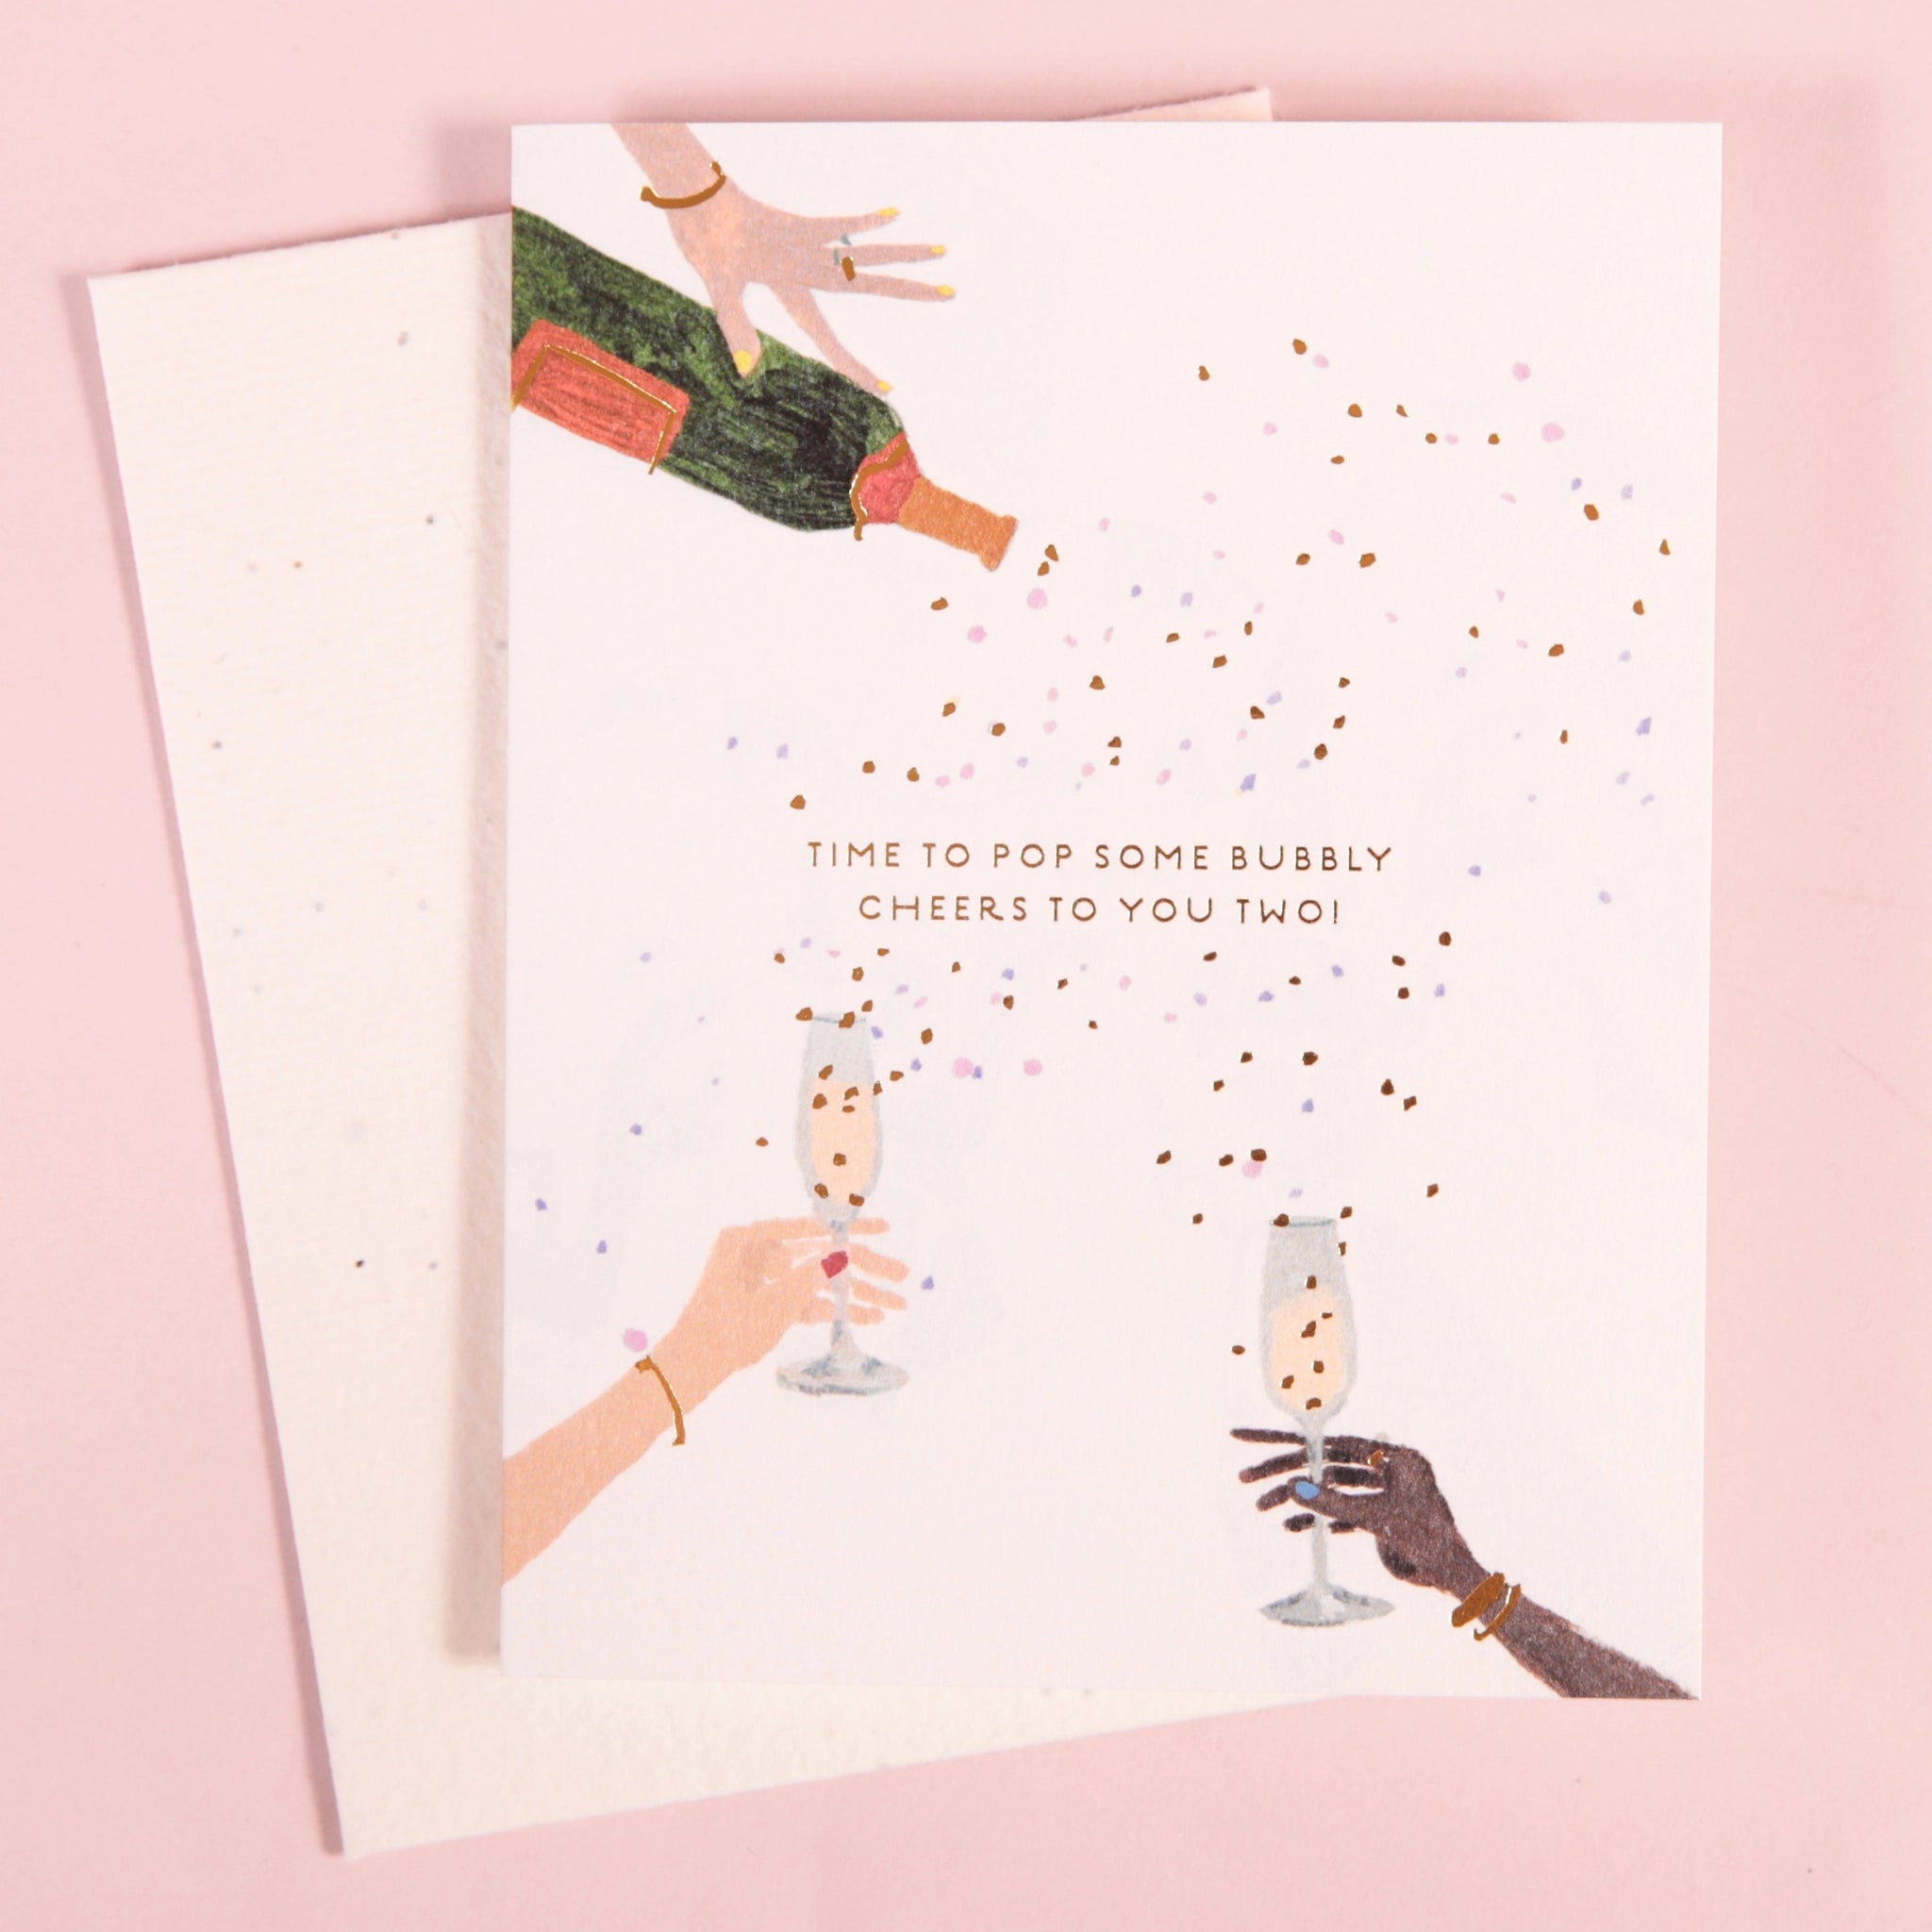 On a pink background is a white card and envelope with an illustration of three hands holding a bottle of Champagne and the others holding champagne flutes with confetti all over and small text that reads, &quot;Time to pop some bubbly cheers to you two!&quot;.